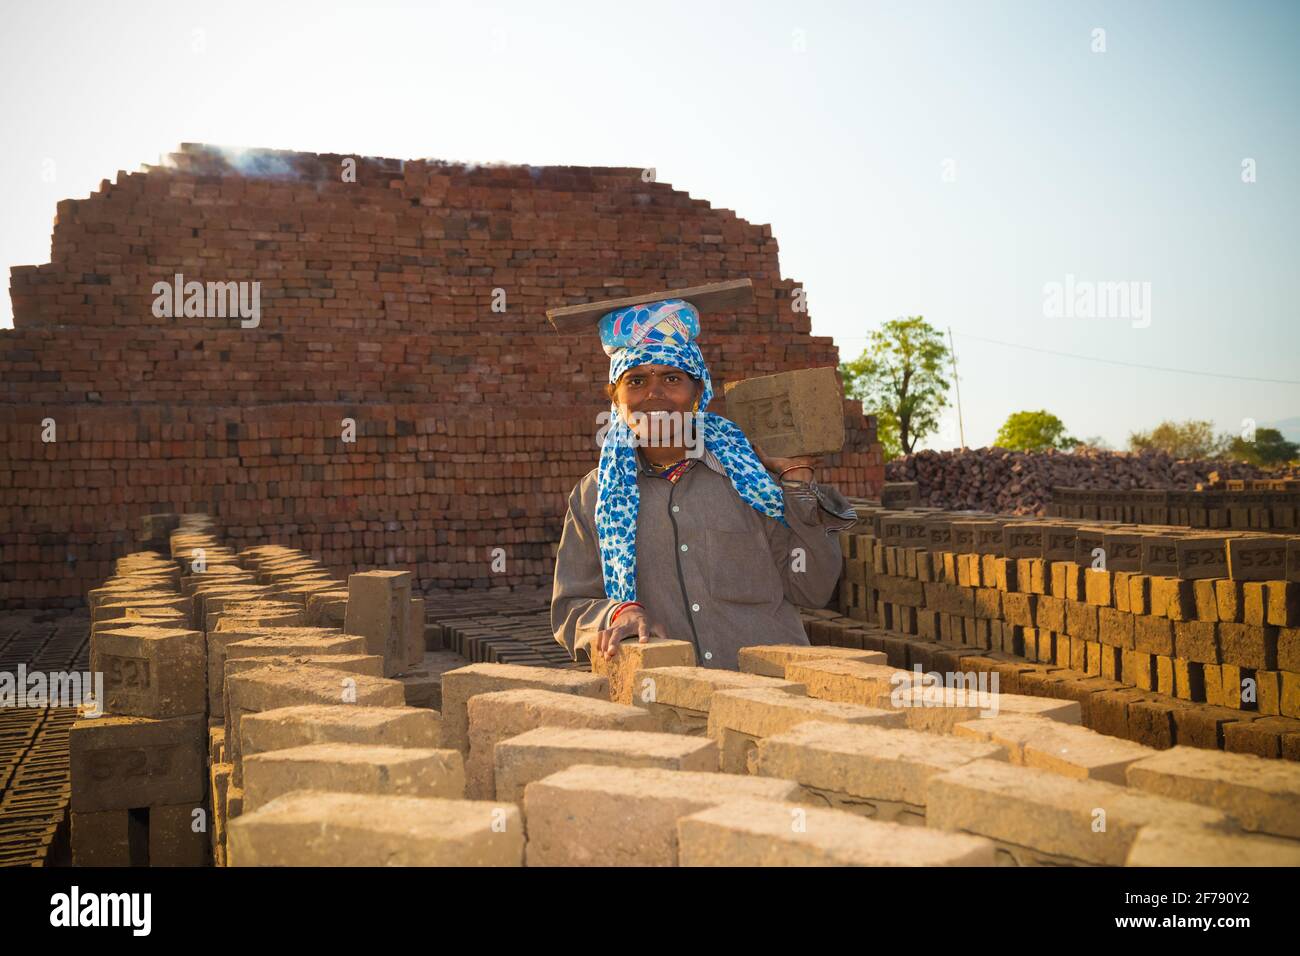 An independent, beautiful, hard working woman, working in the brick kiln site. Active traditional brick kiln in the backdrop. Stock Photo